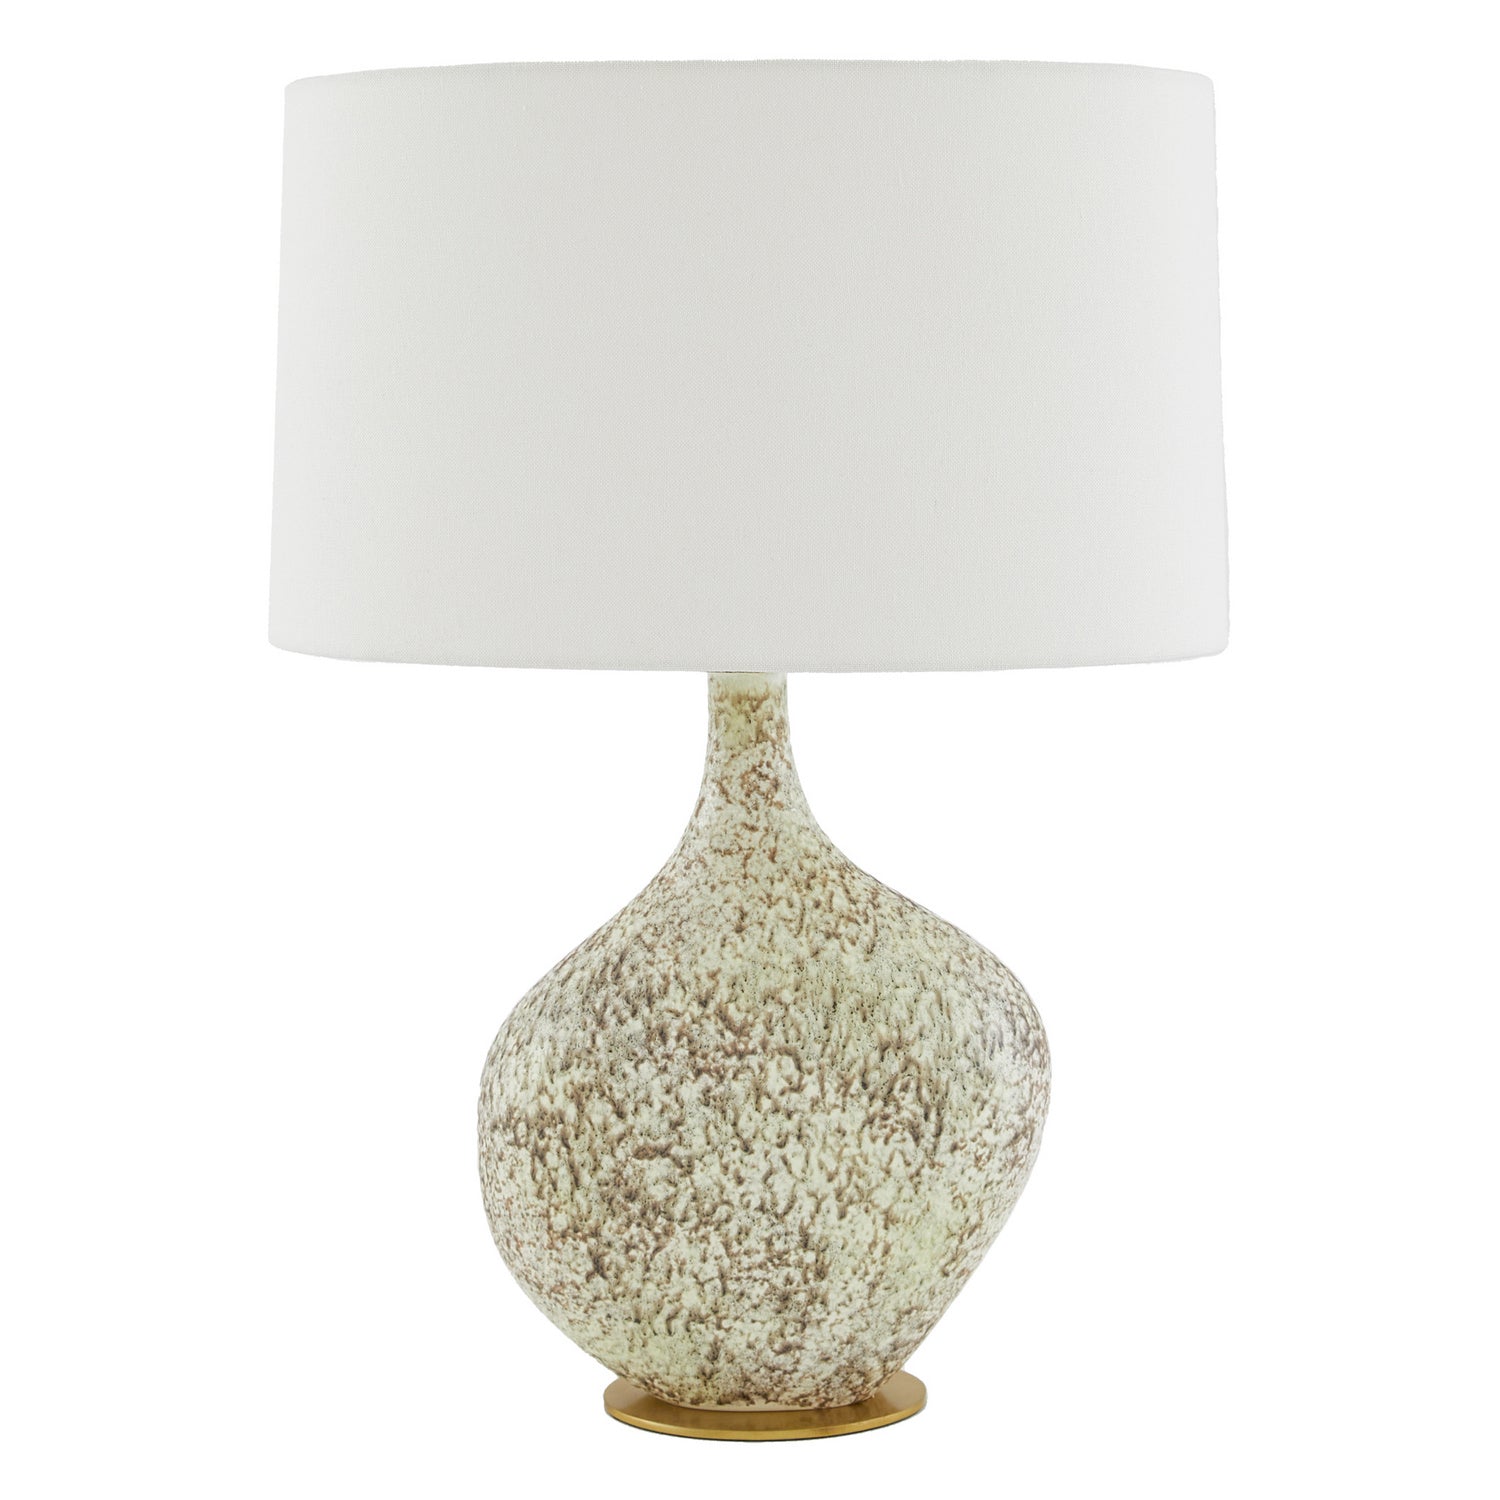 One Light Table Lamp from the Stillwater collection in Moss Reactive finish